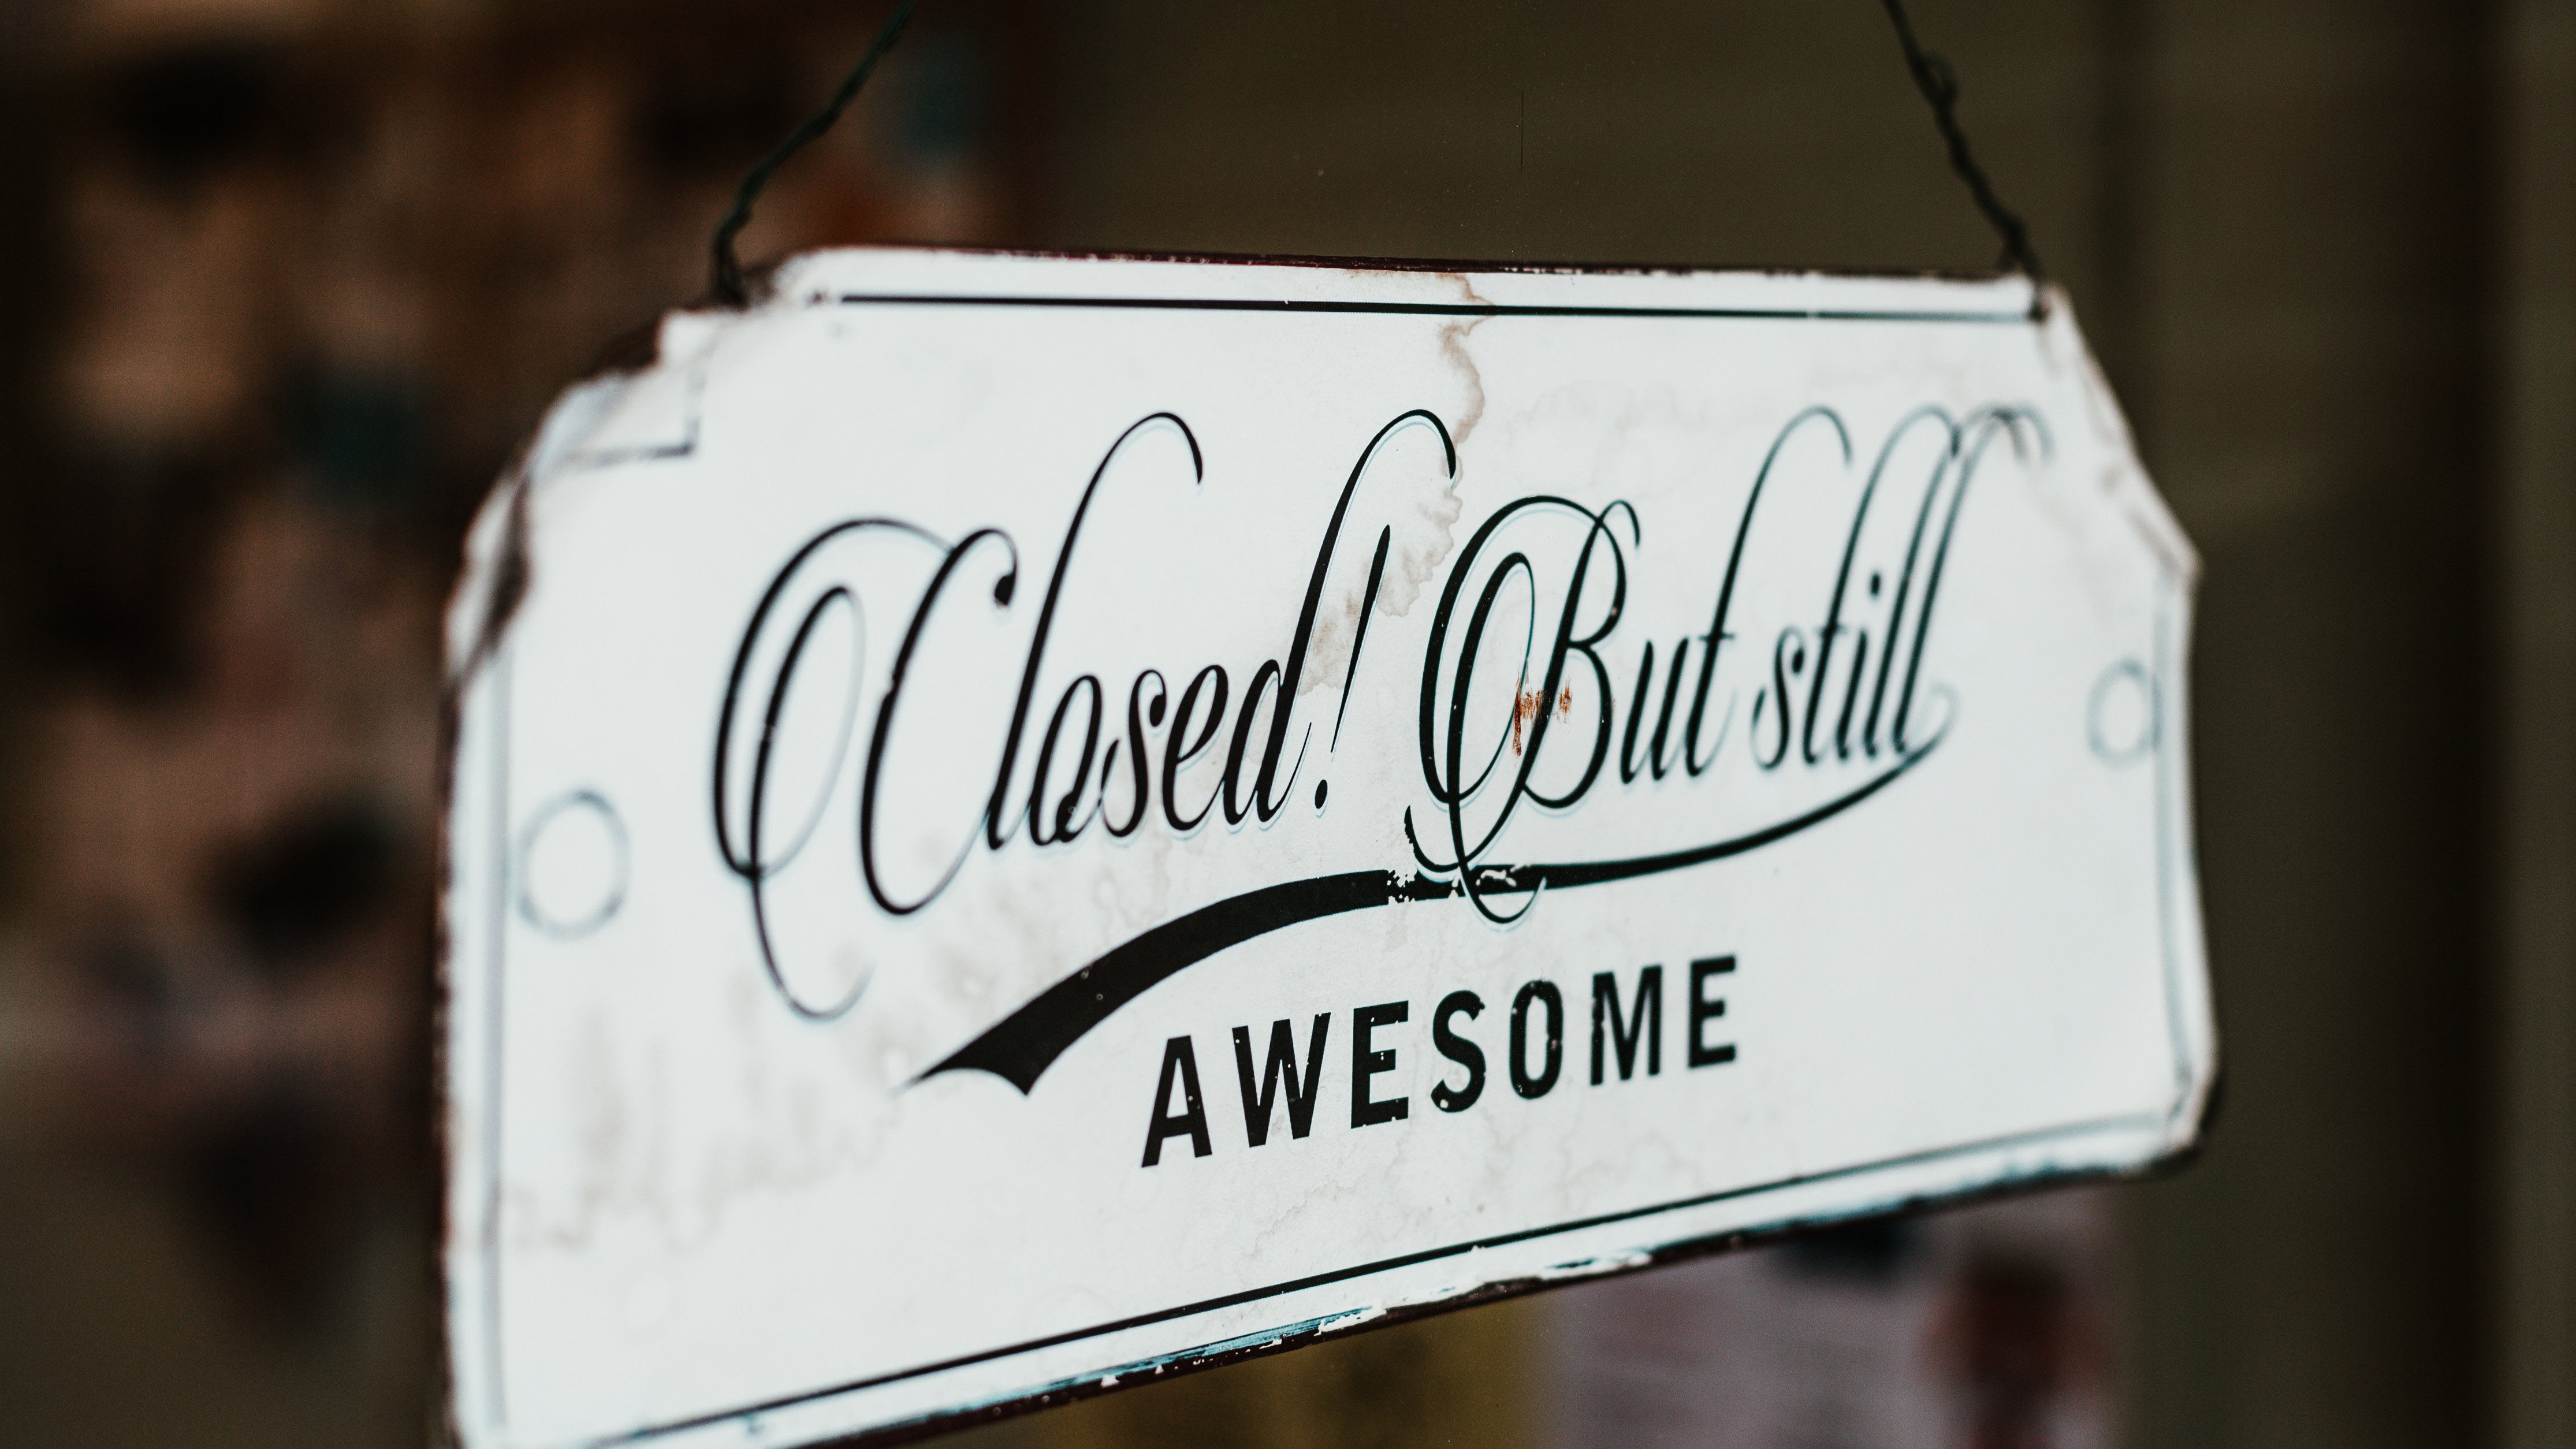 A closeup shot of a sign saying "Closed but still awesome".